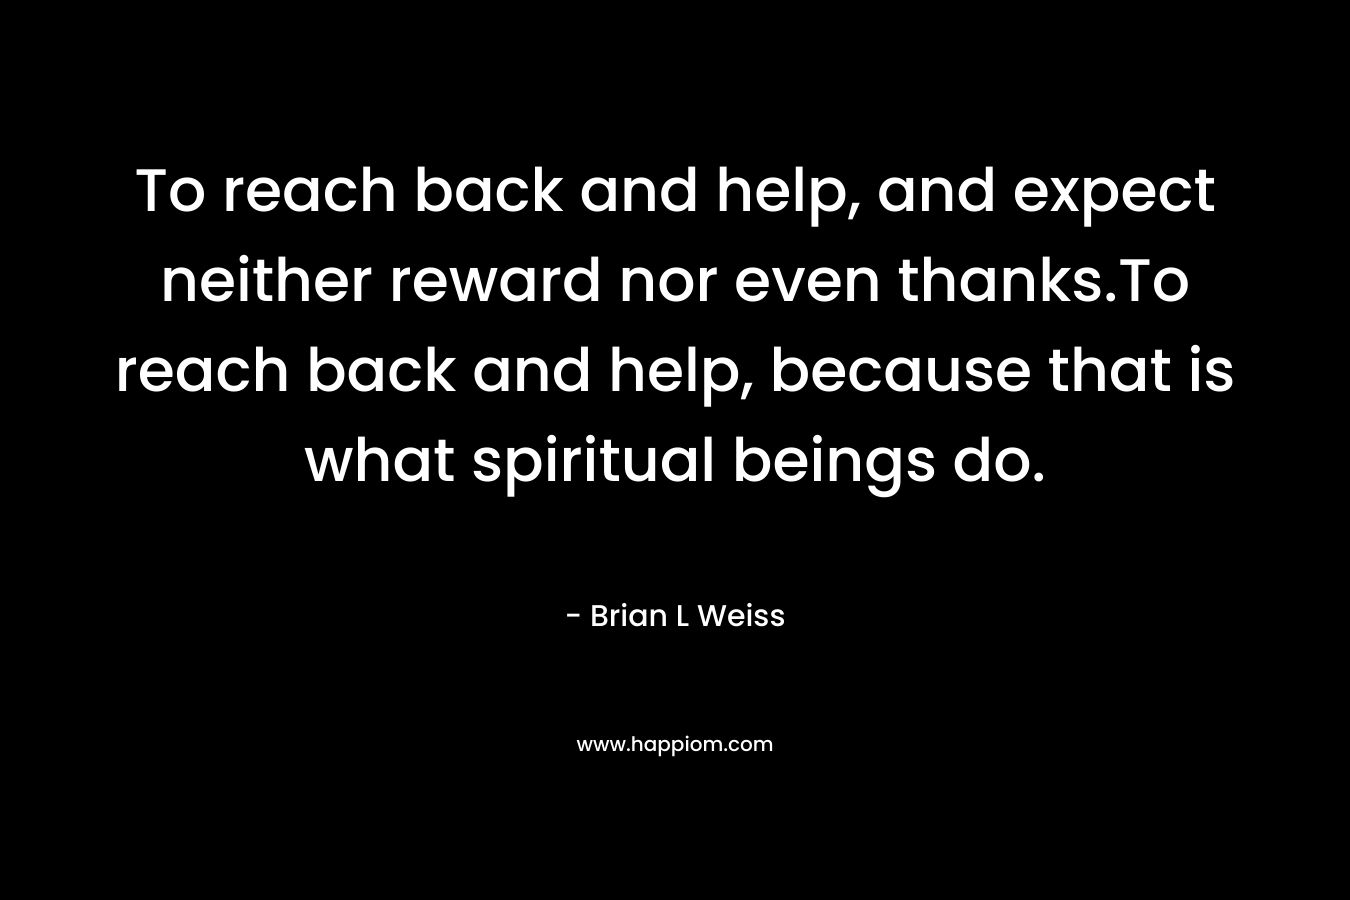 To reach back and help, and expect neither reward nor even thanks.To reach back and help, because that is what spiritual beings do.